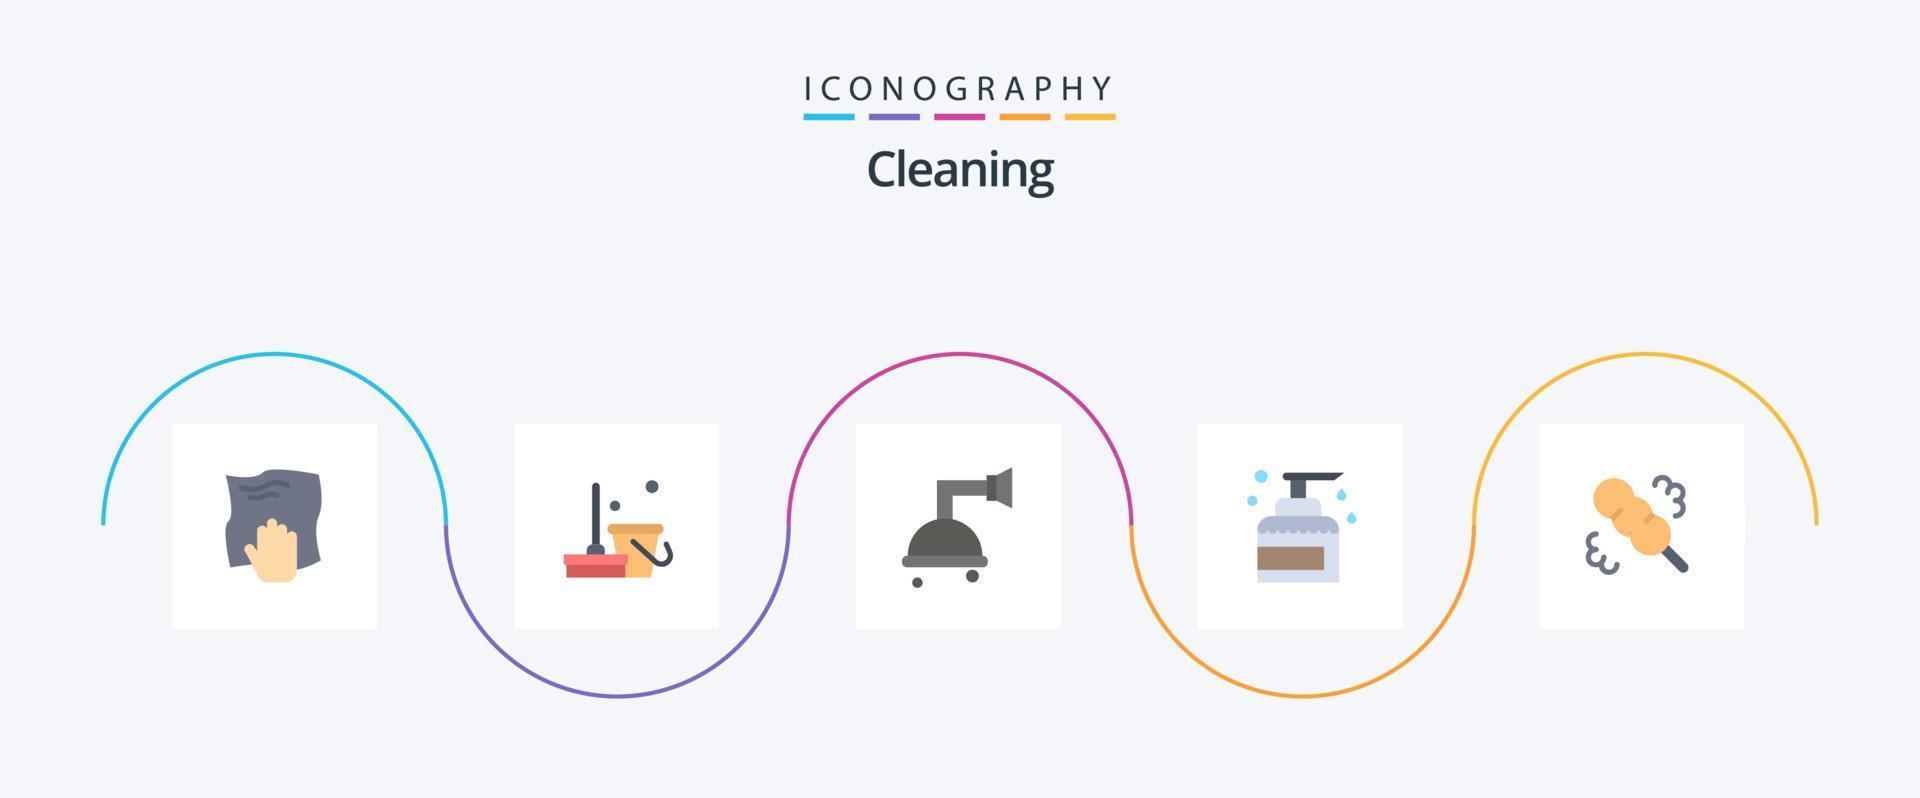 Cleaning Flat 5 Icon Pack Including broom. product. sweep. keeping. cleaning vector